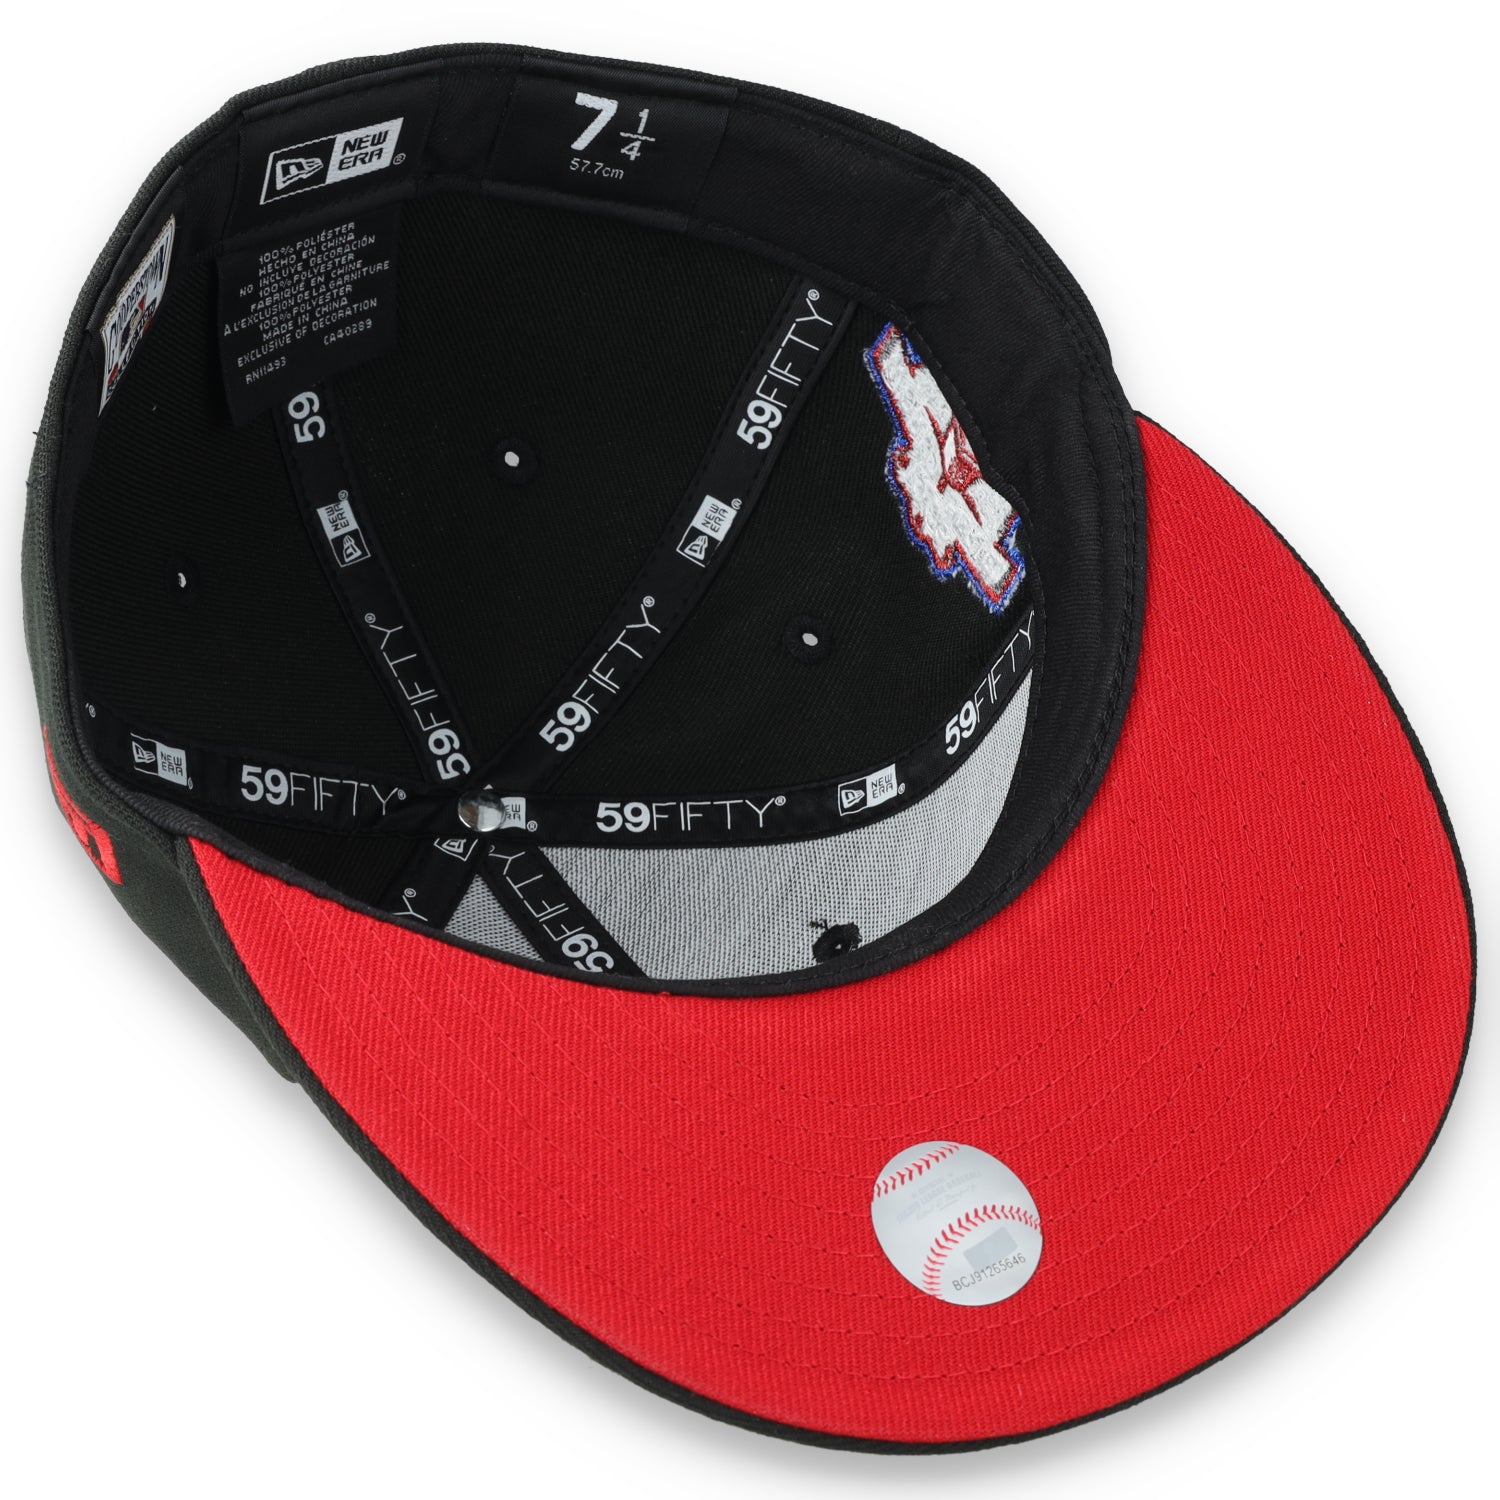 New Era Boston Red Sox 2003 World Series Side Patch 59FIFTY Fitted Hat-Metallic Grey/Black